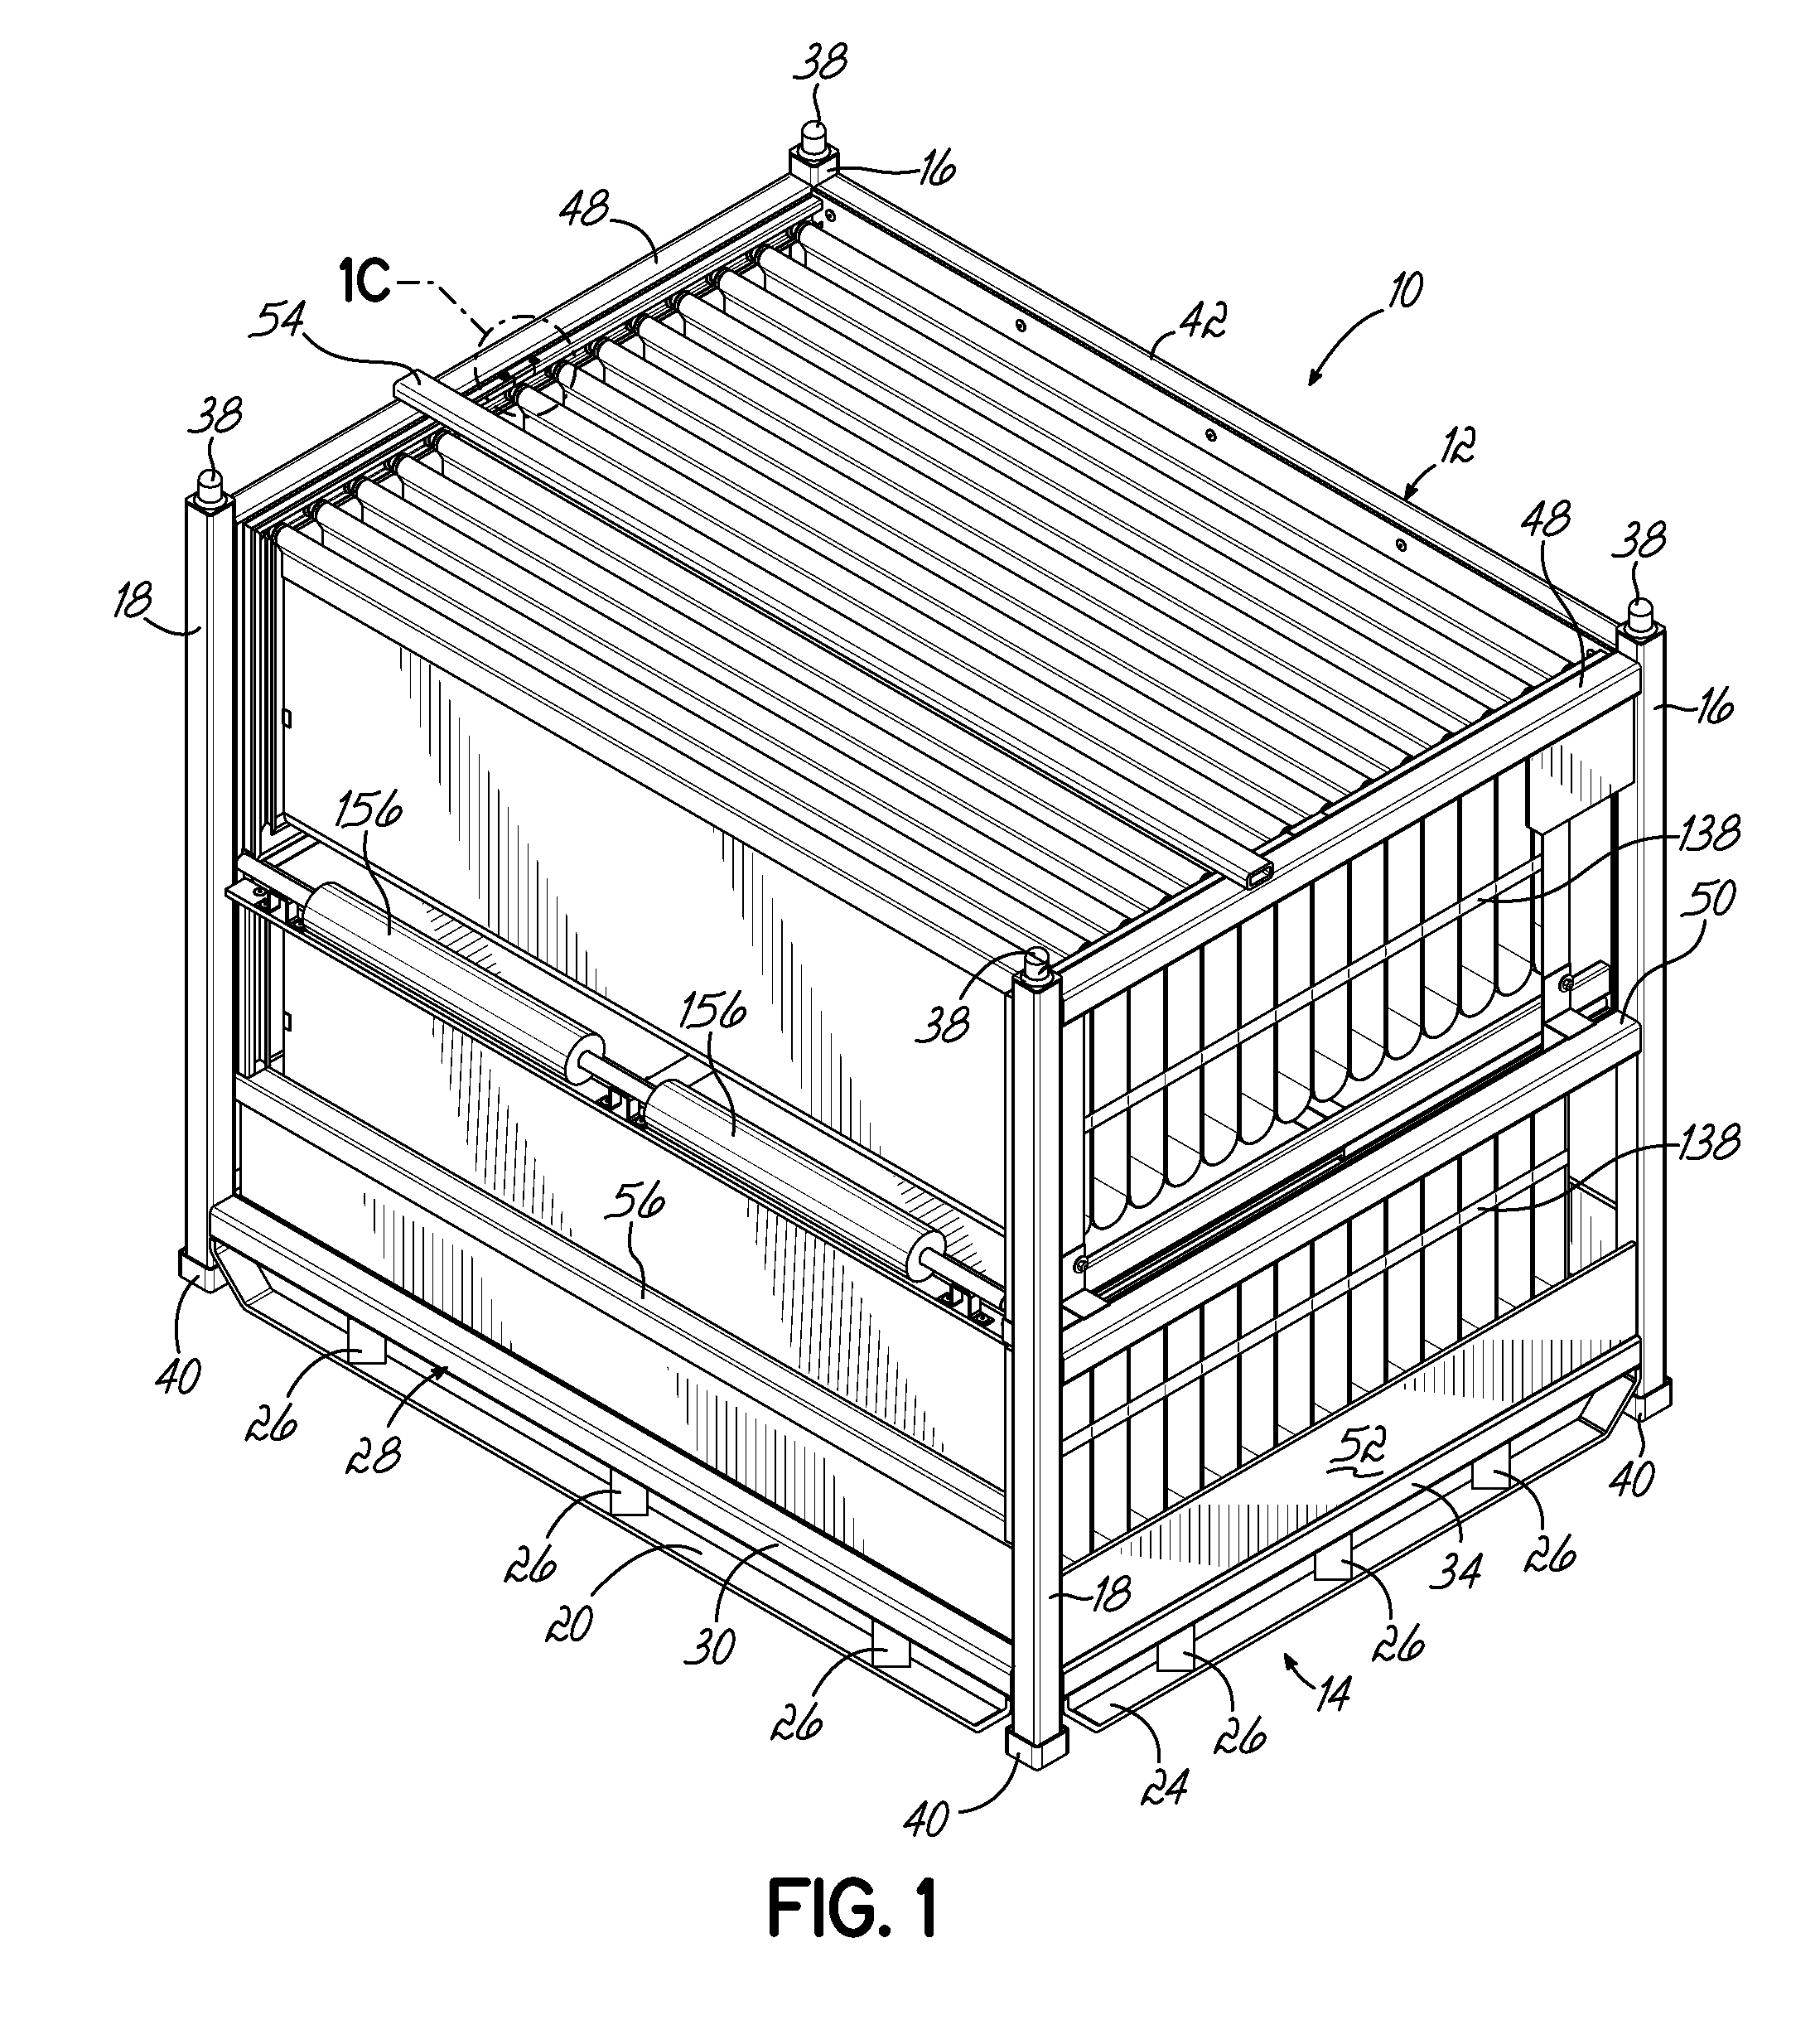 Container Having Non-Linear and Linear Tracks For Supporting Movable Dunnage